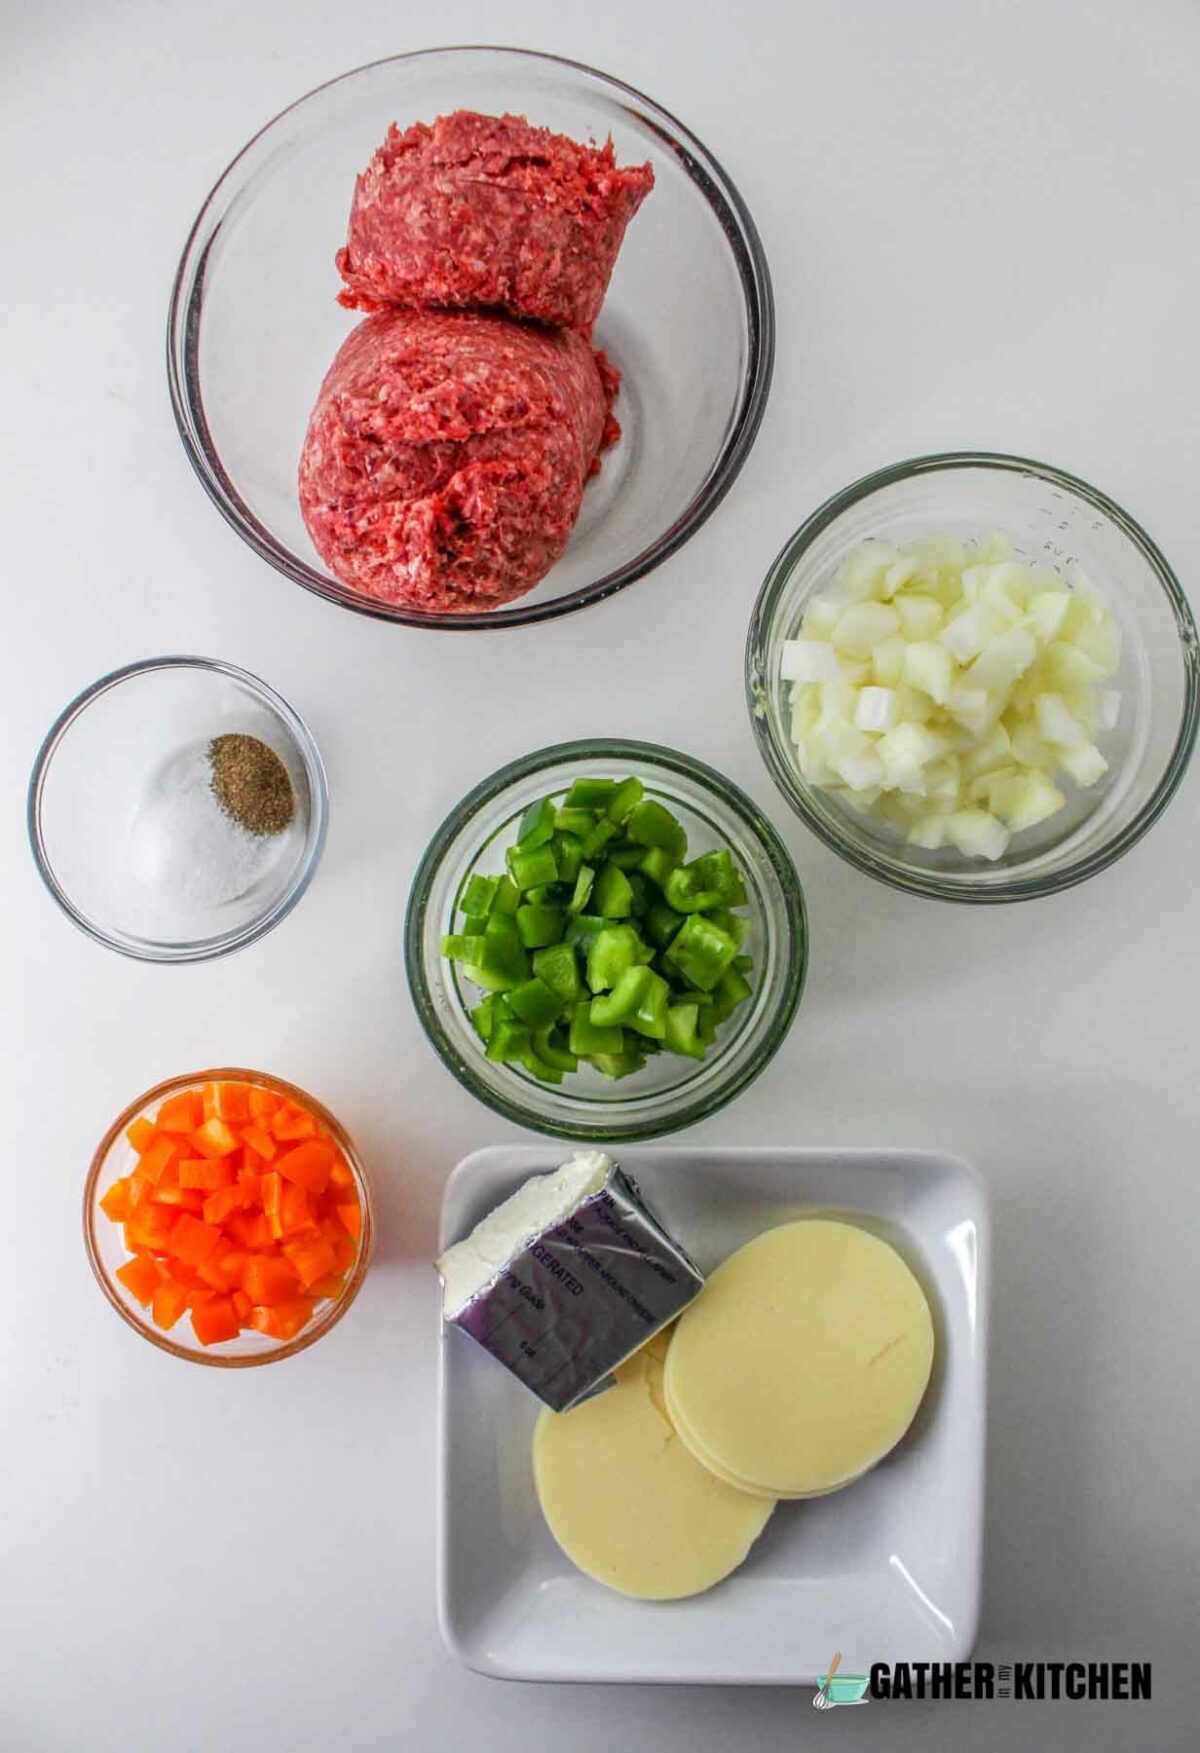 Ingredients for Philly Cheesesteak casserole: ground beef, chopped onions, chopped bell peppers, chopped orange bell pepper, provolone cheese, cream cheese, and salt & pepper.